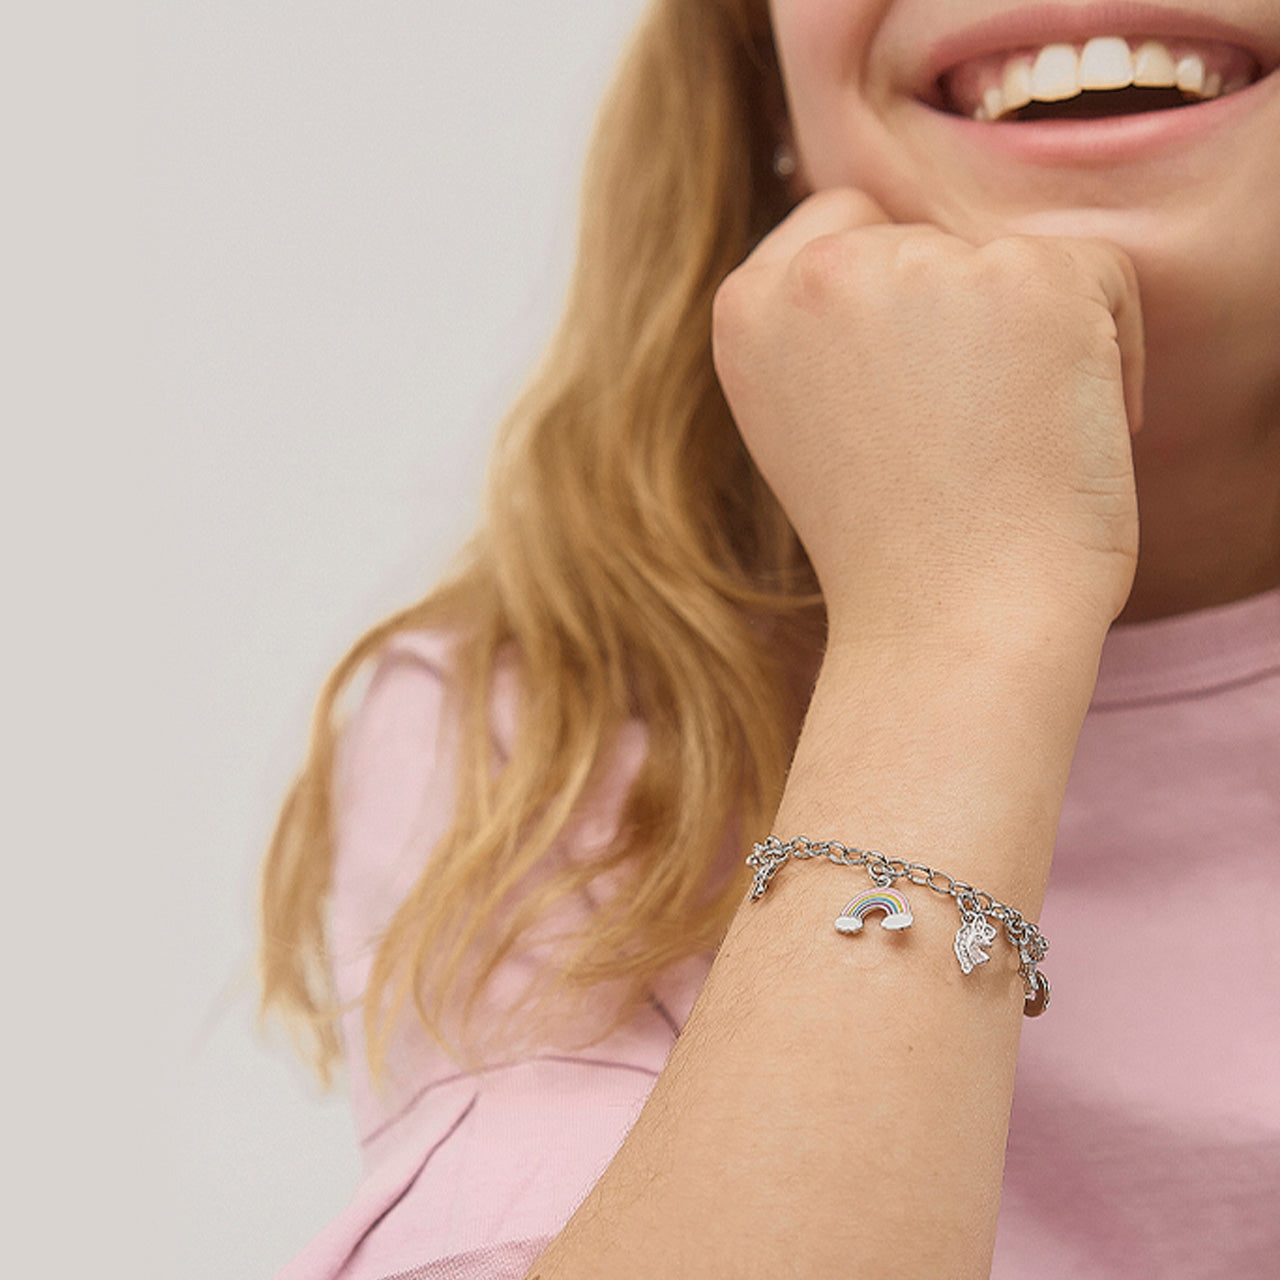 7 Sterling Silver Girl's Link Charm Bracelet for Kids - Base Starter Charm Bracelet for Little Girls - Add Your Charms at in Season Jewelry